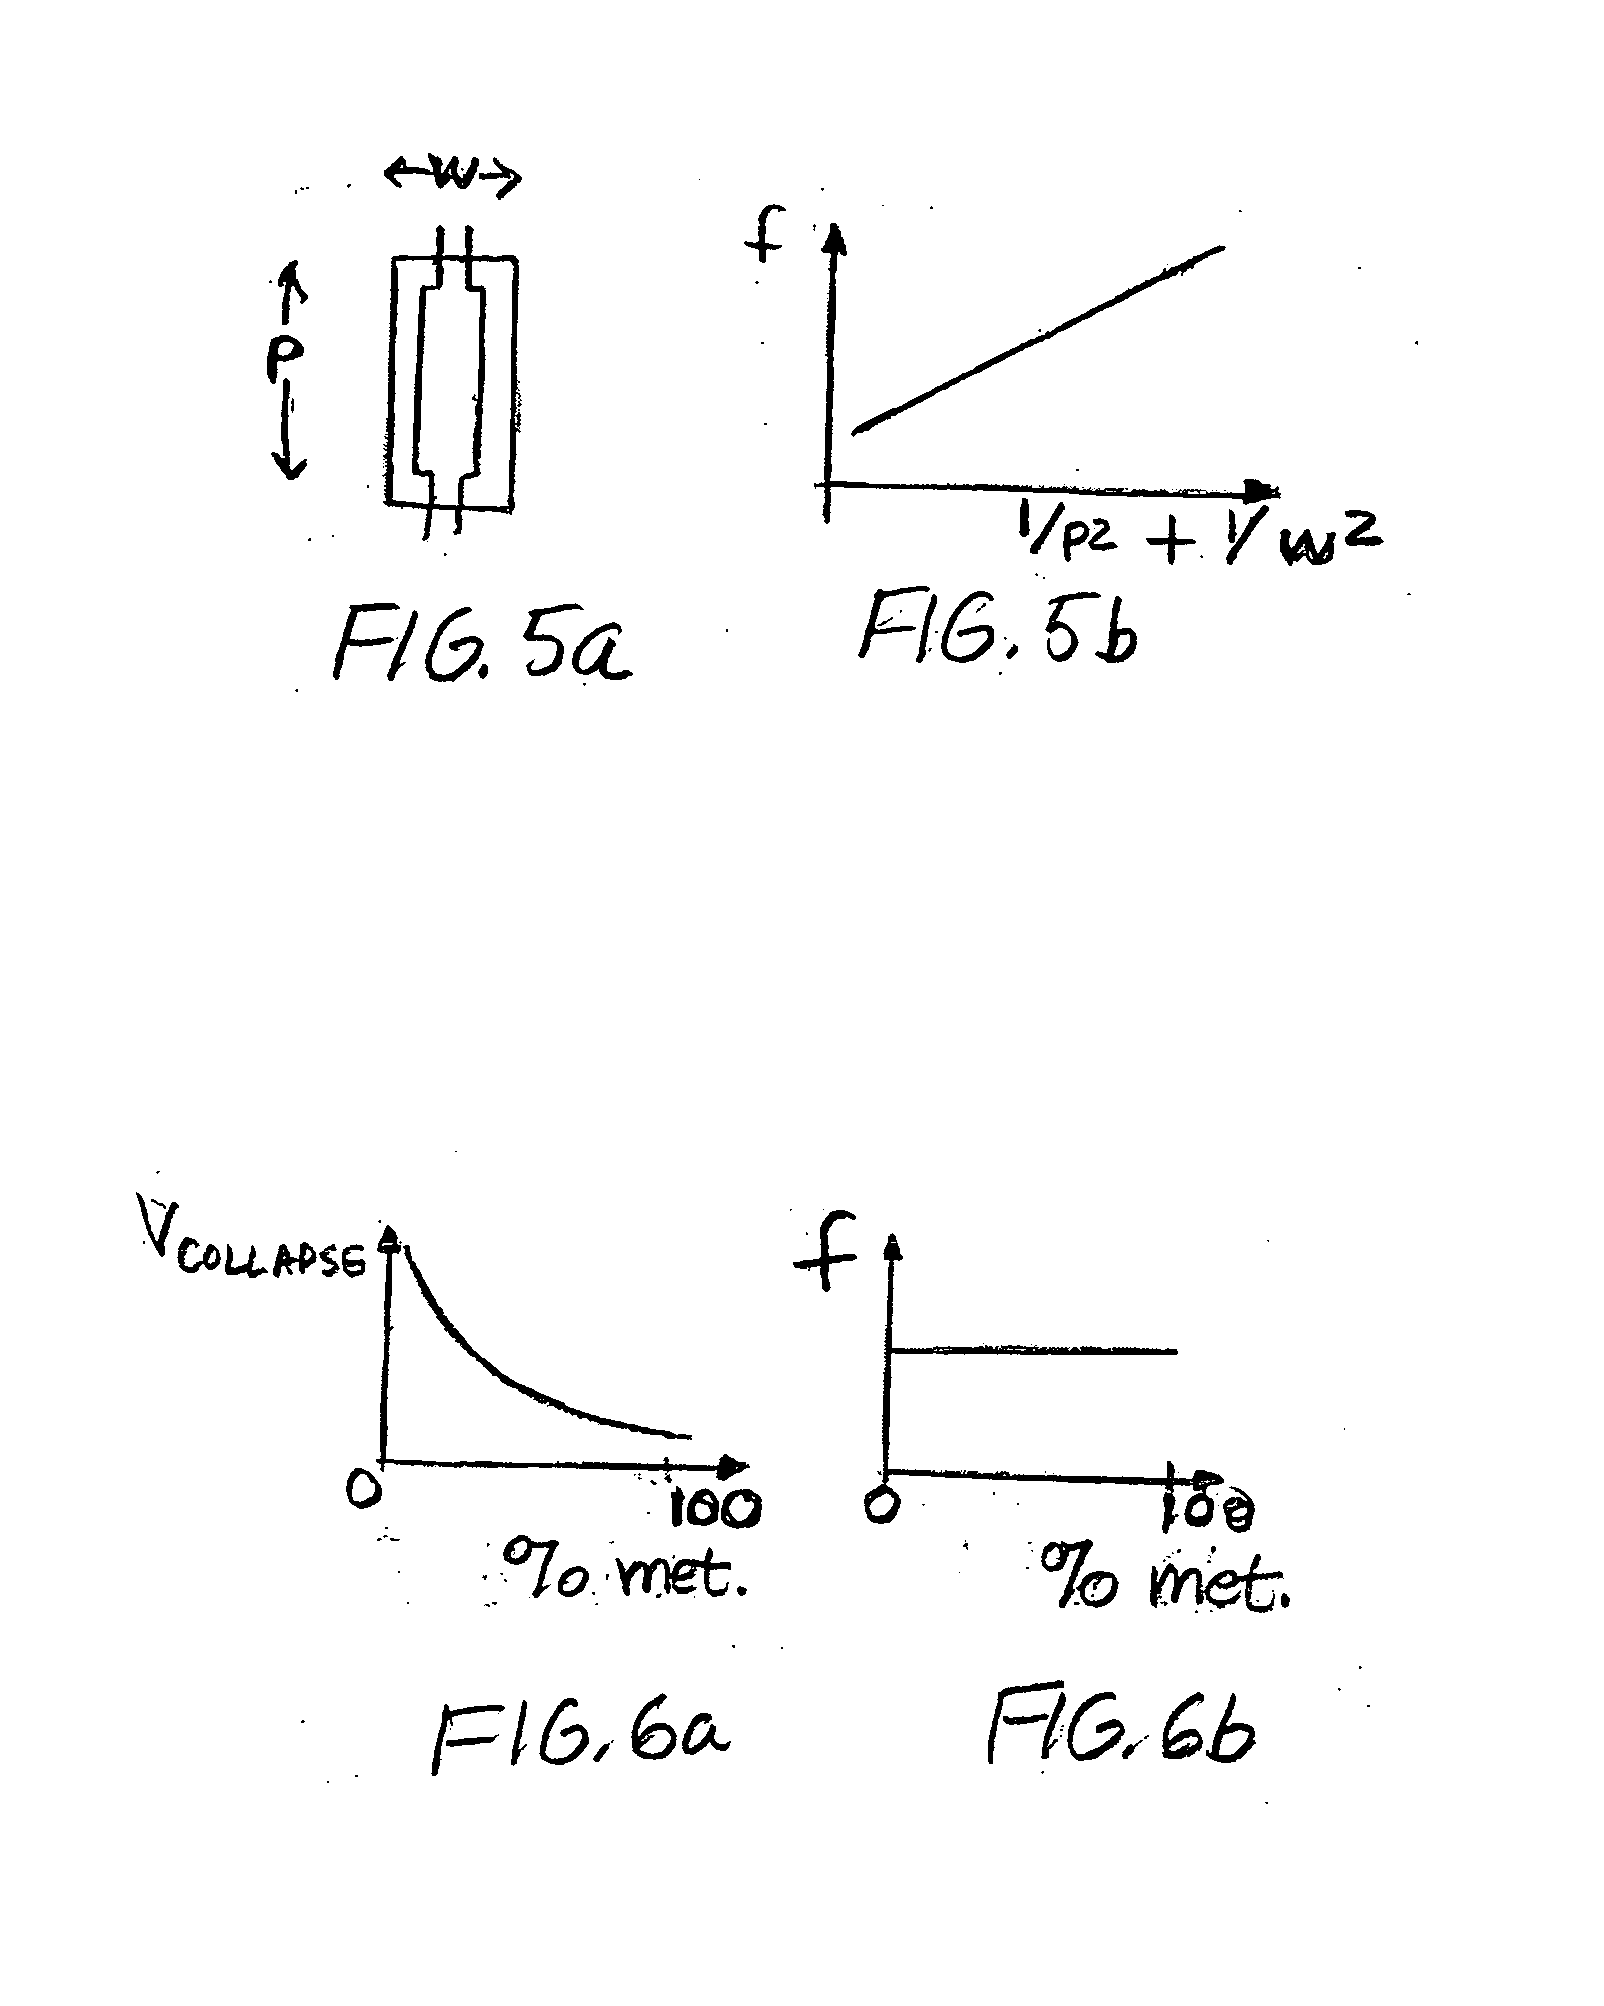 Capacitive micro-machined ultrasonic transducer for element transducer apertures